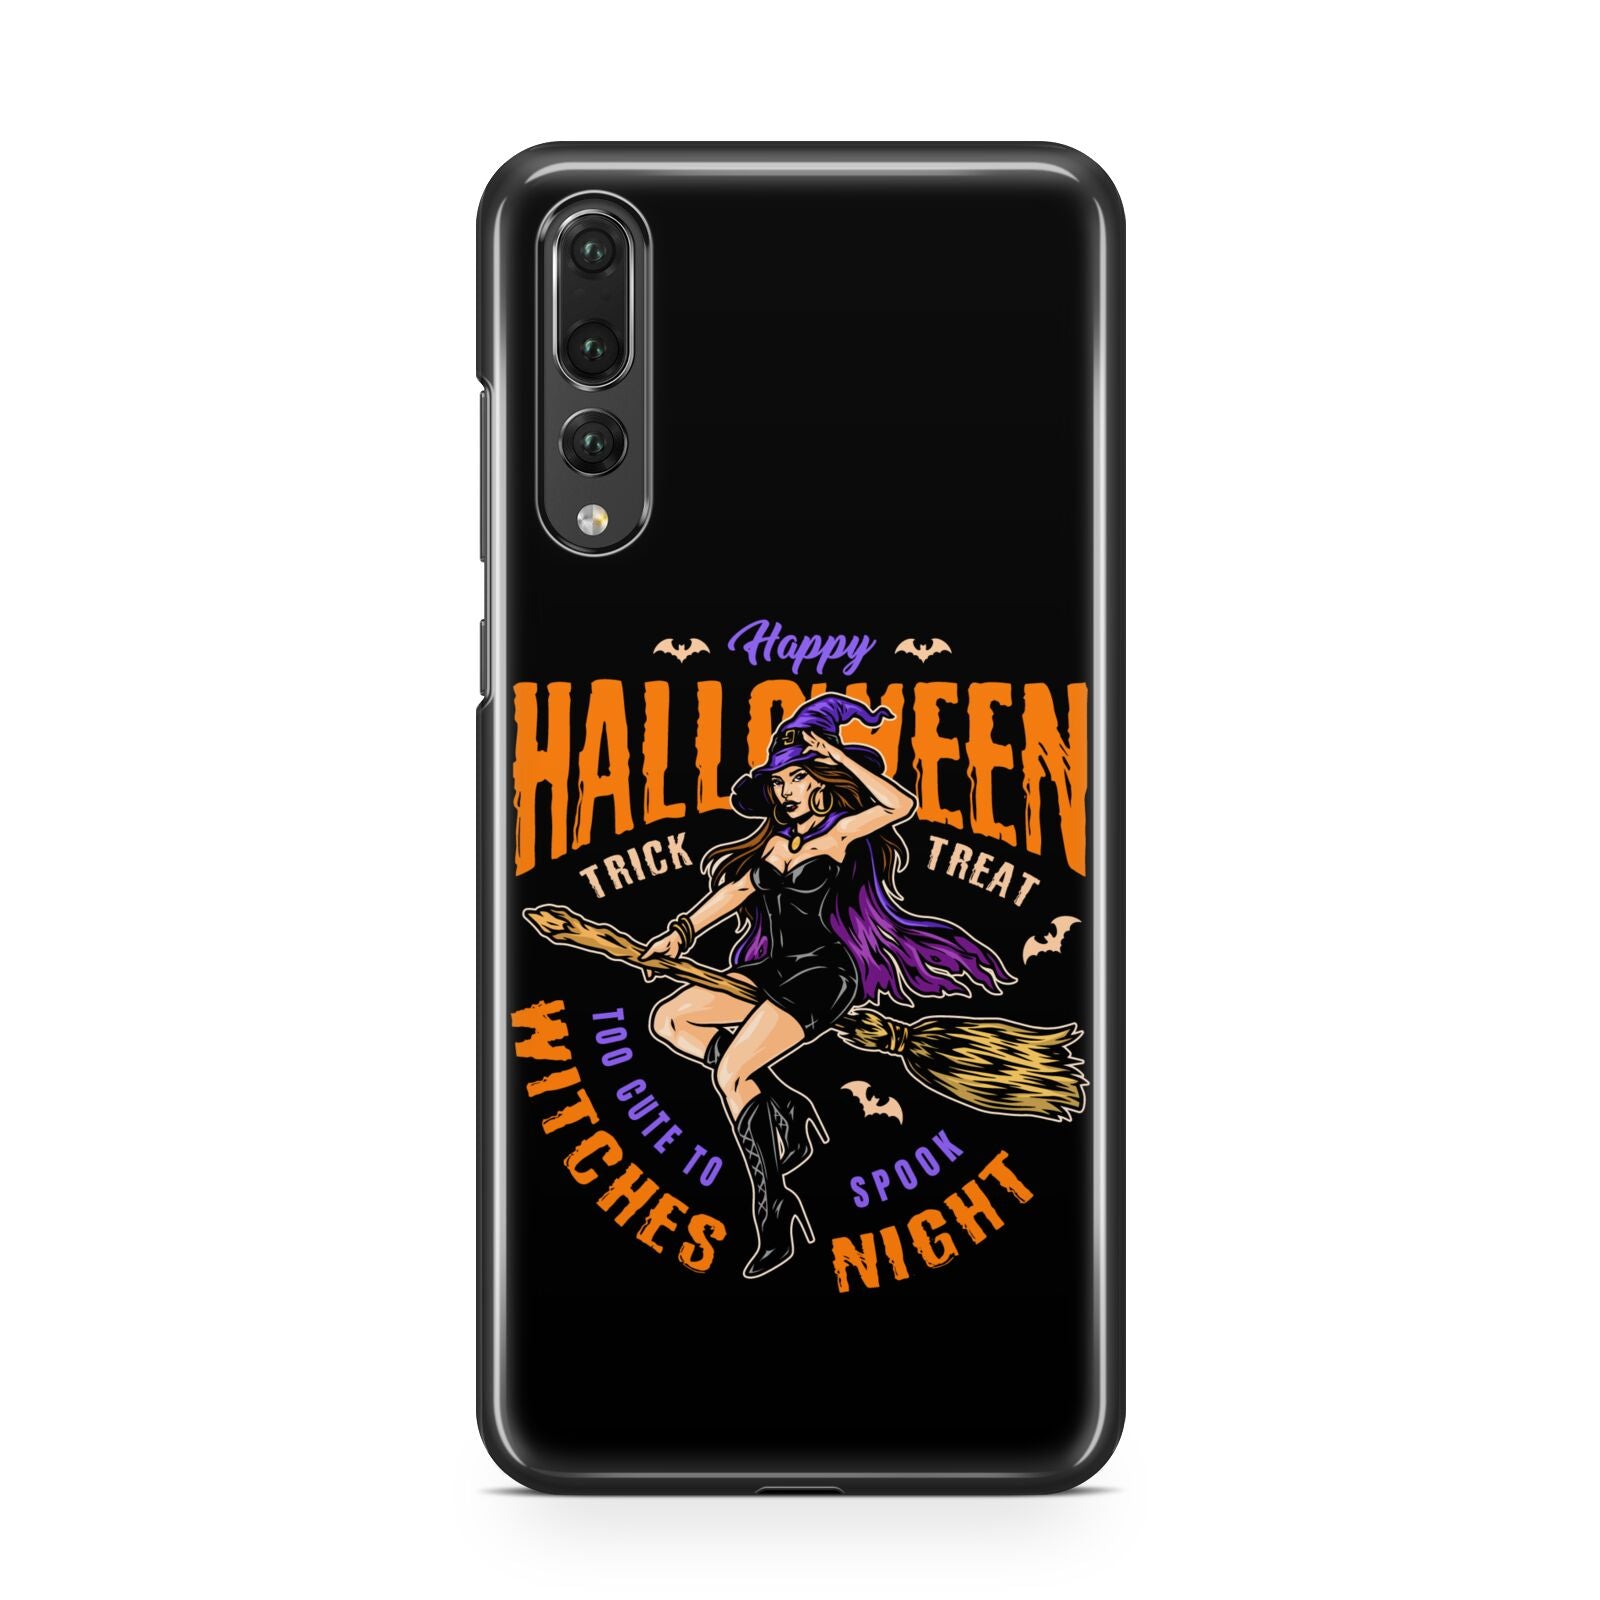 Witches Night Huawei P20 Pro Phone Case